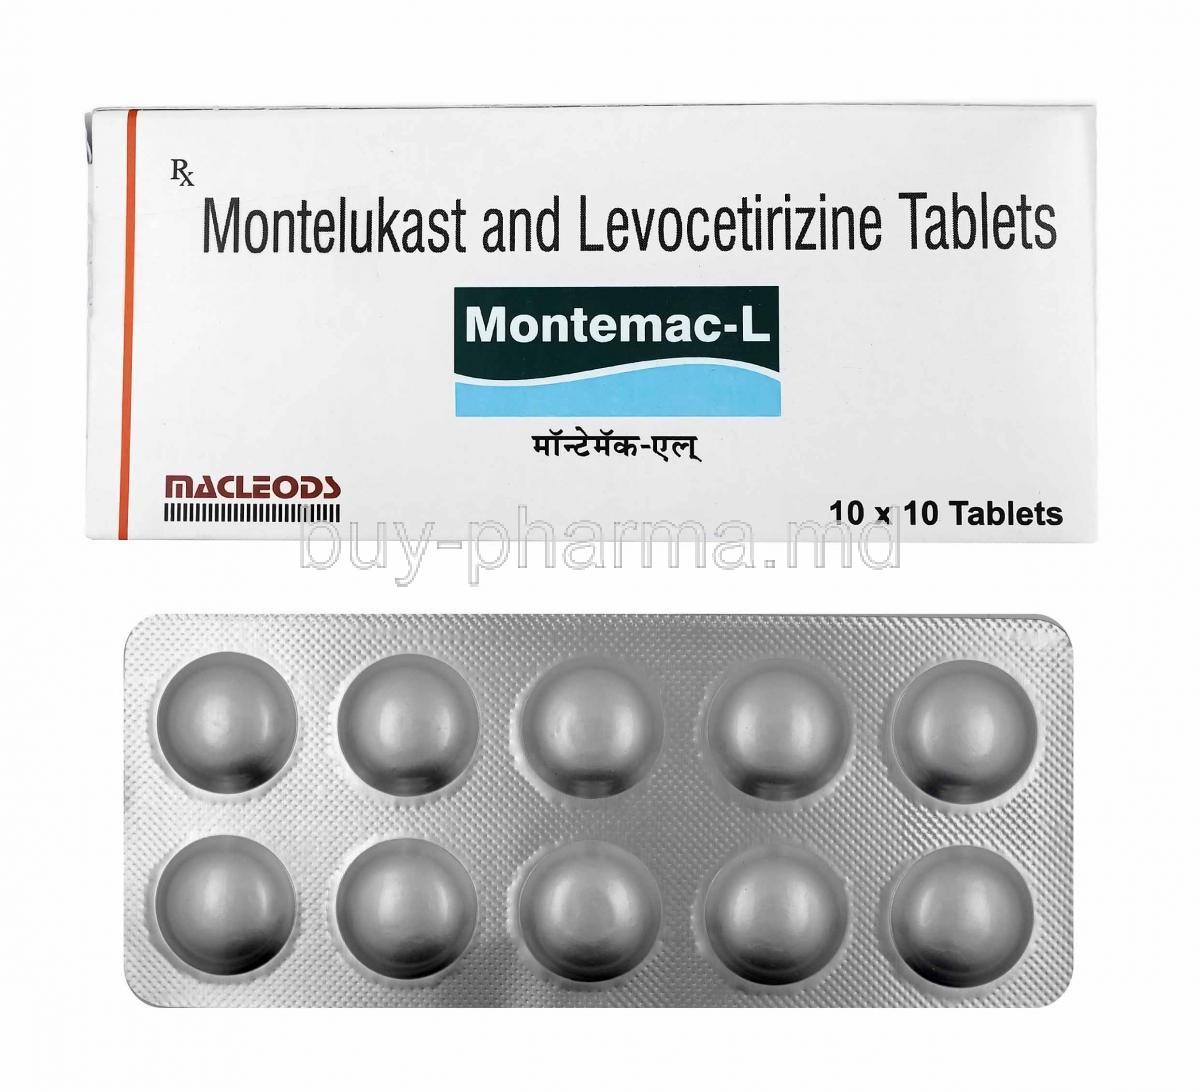 Montemac-L, Levocetirizine and Montelukast box and tablets